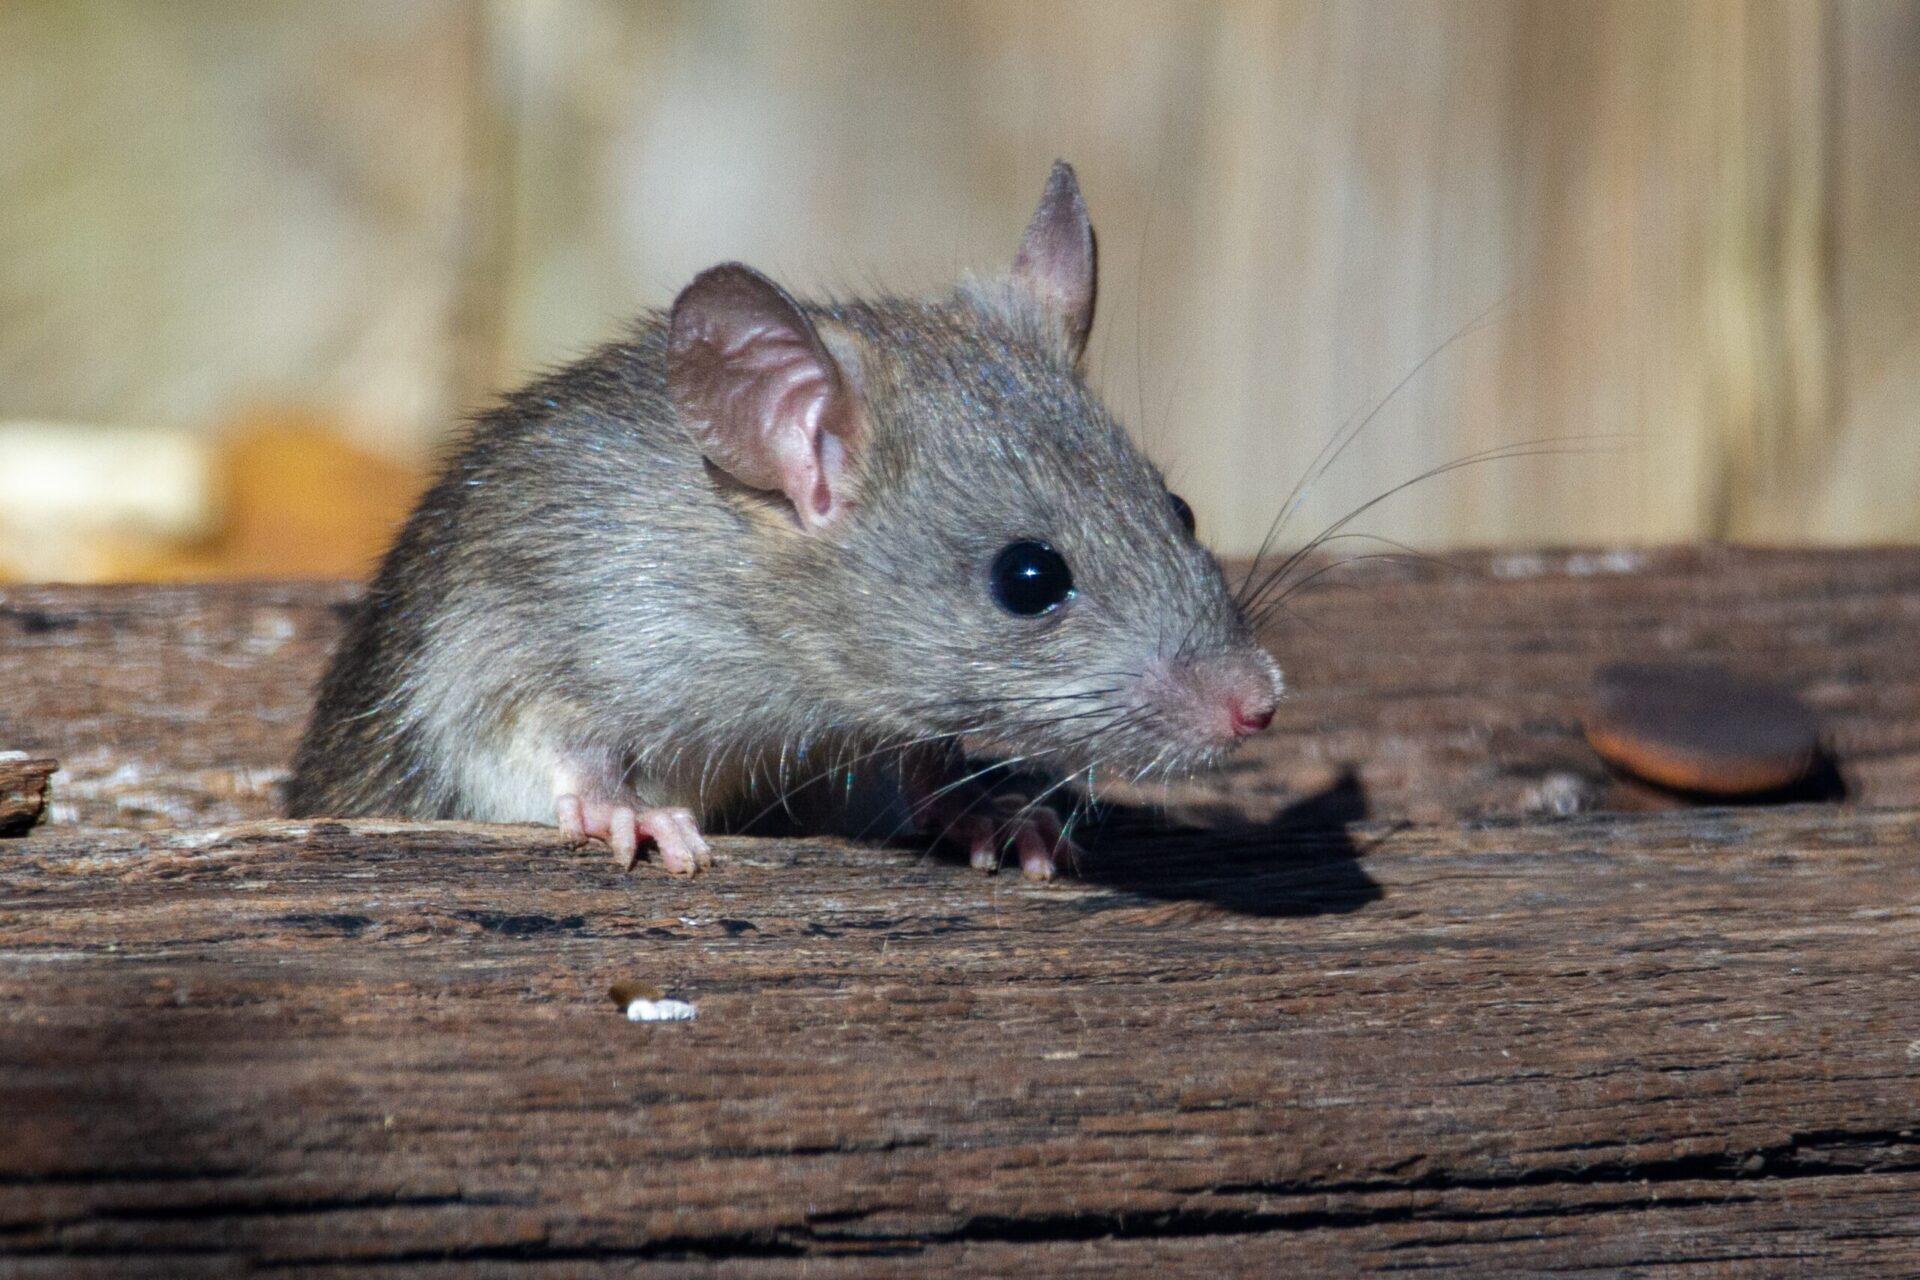 https://www.catseyepest.com/wp-content/uploads/2022/10/how-to-get-rid-of-rats-scaled.jpg